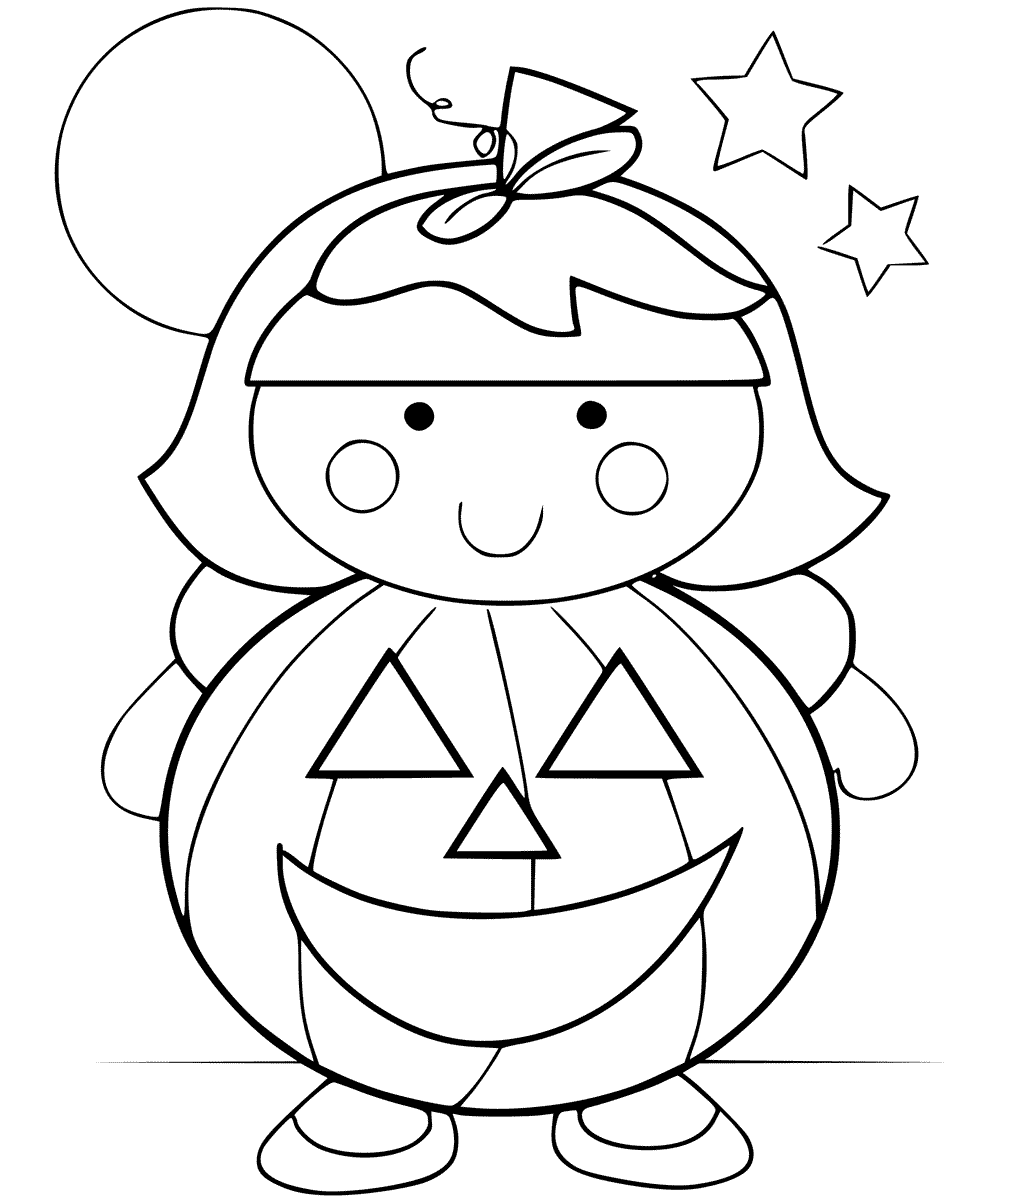 Cute Halloween Free Printable Coloring Page